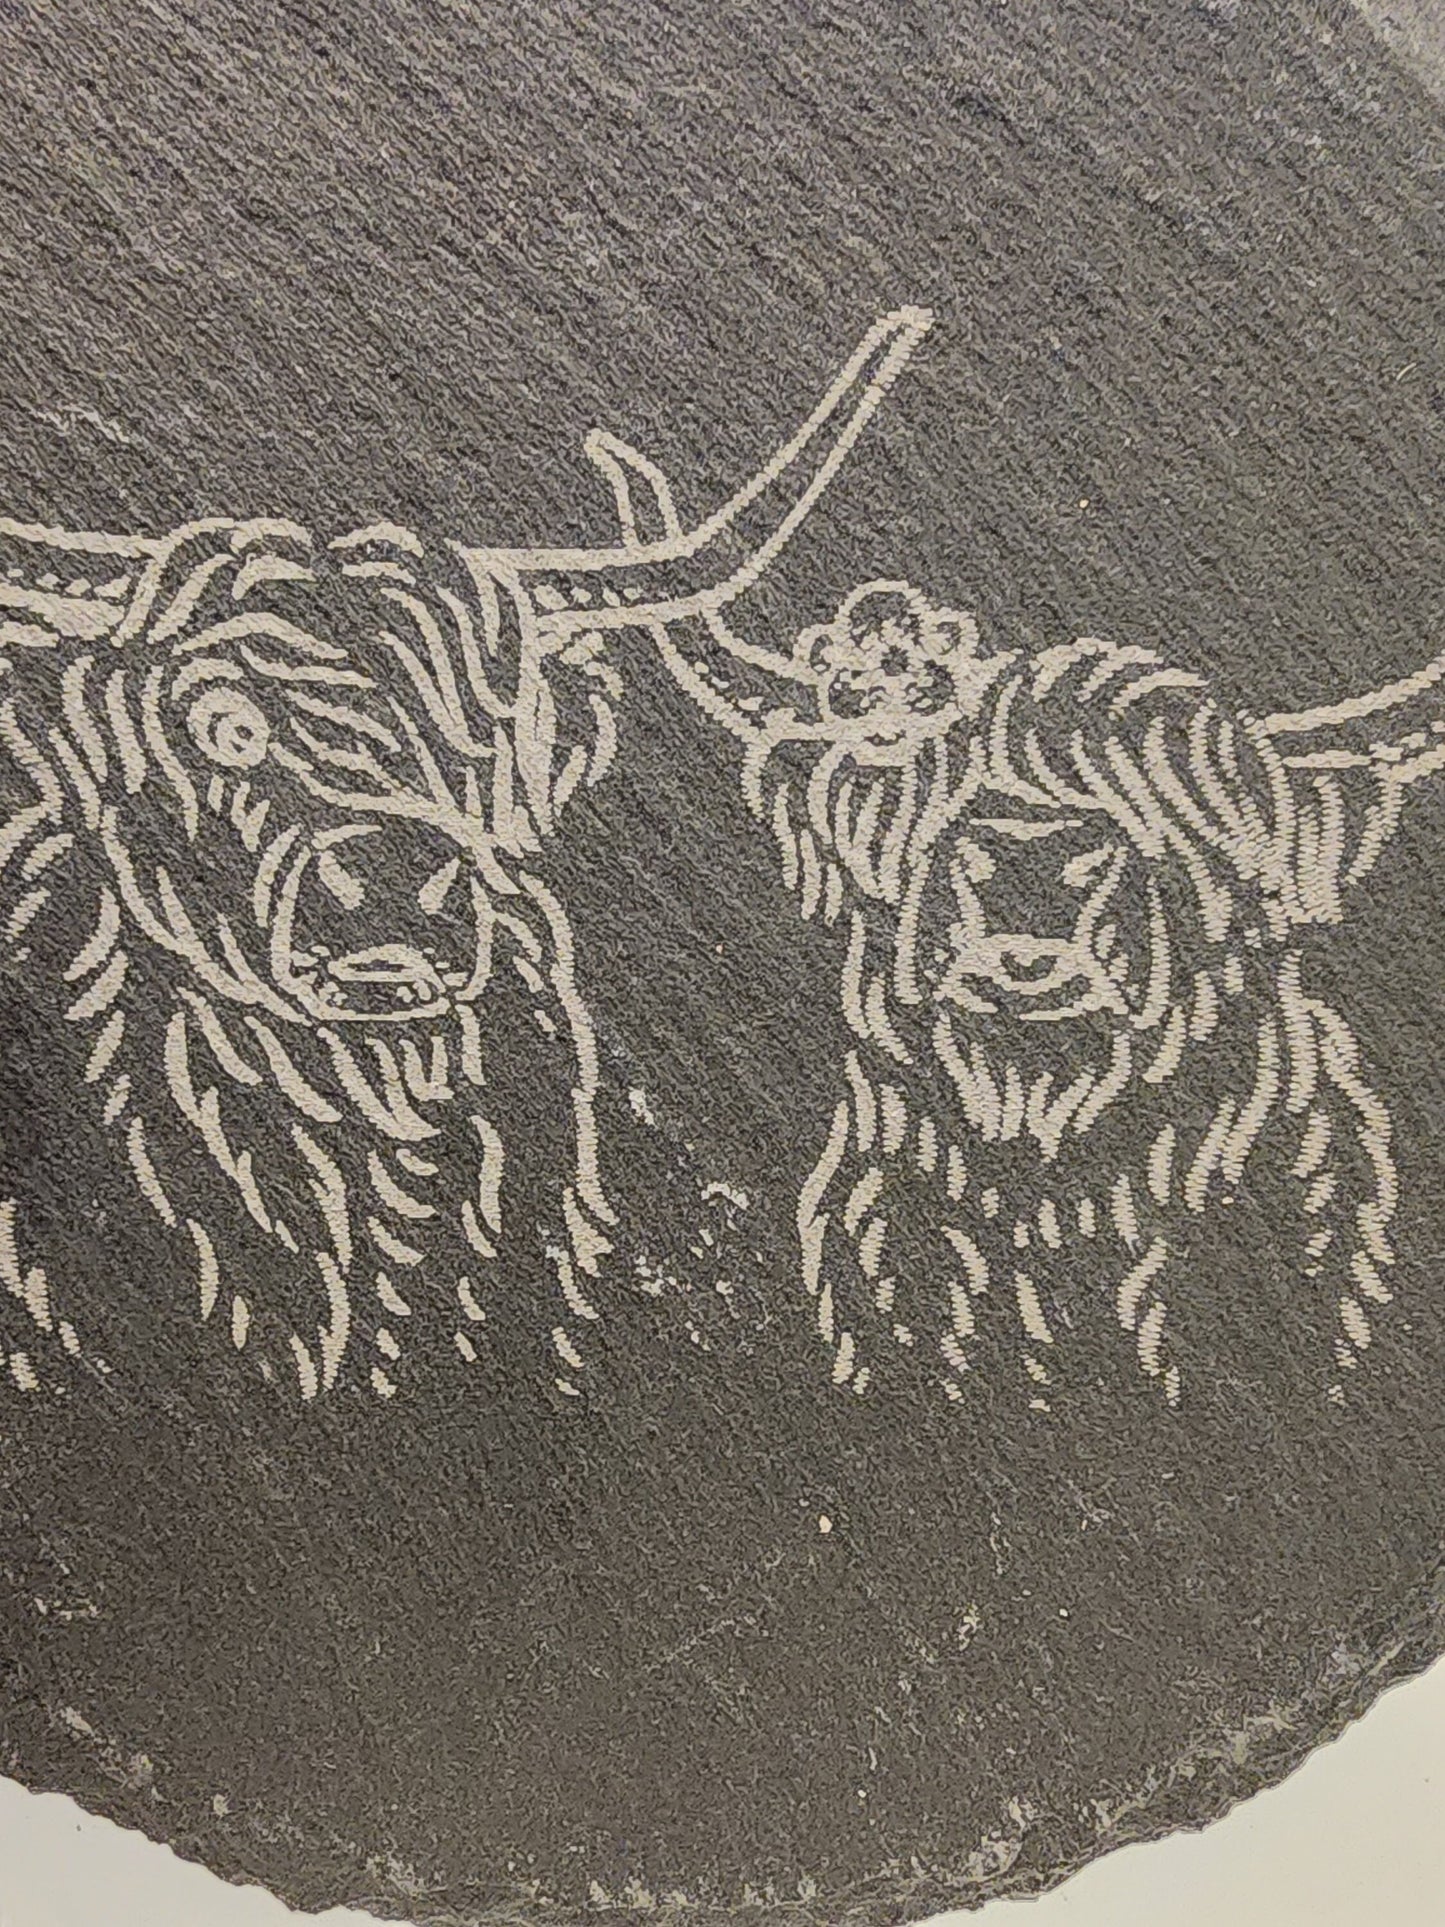 Highland cow etched Slate coasters, set of 4, four different designs